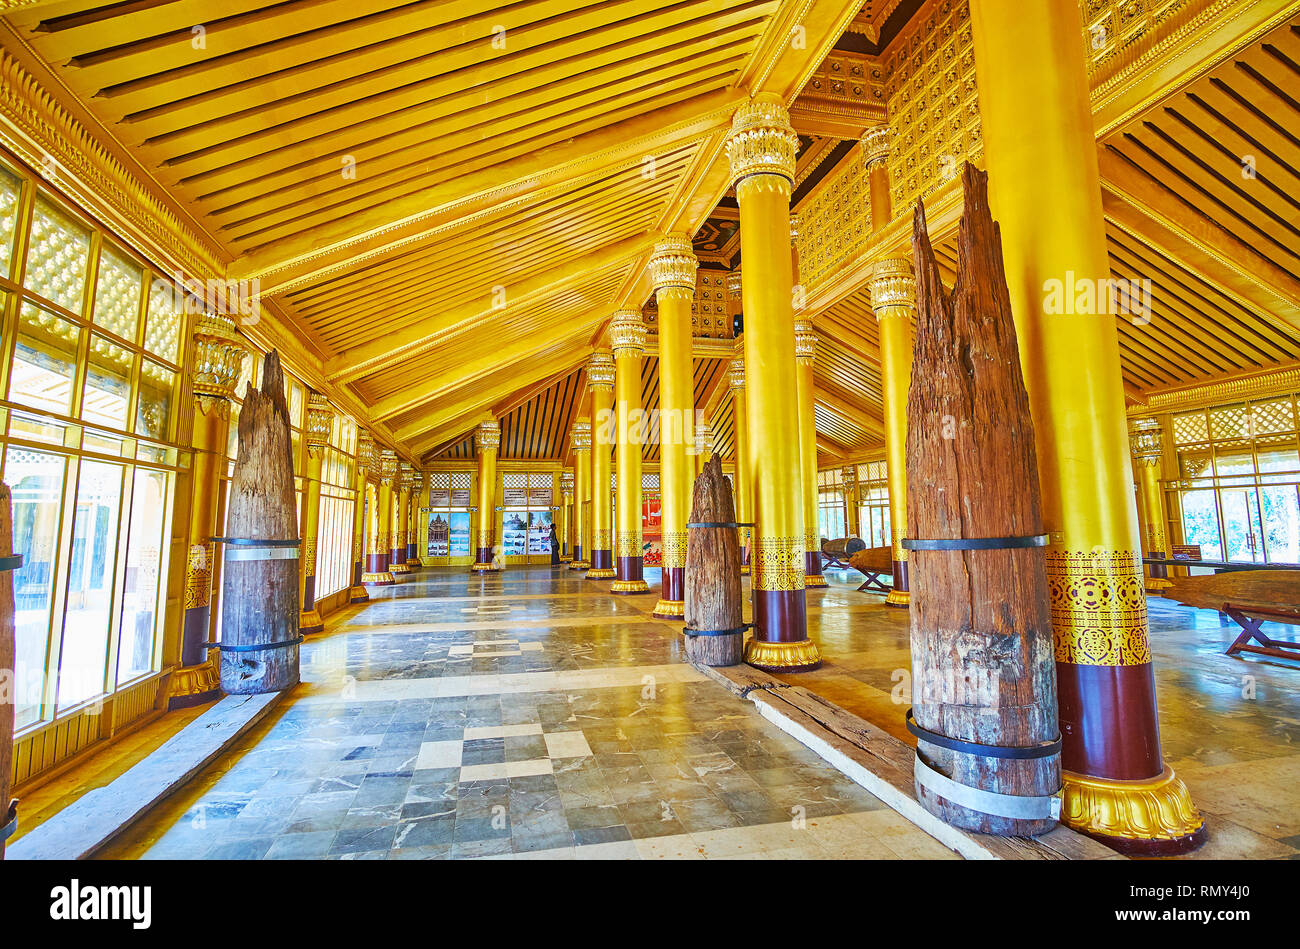 BAGO, MYANMAR - FEBRUARY 15, 2018: The scenic Great Audience Hall (Lion Throne Hall) of historic royal Kanbawzathadi palace, on February 15 in Bago. Stock Photo